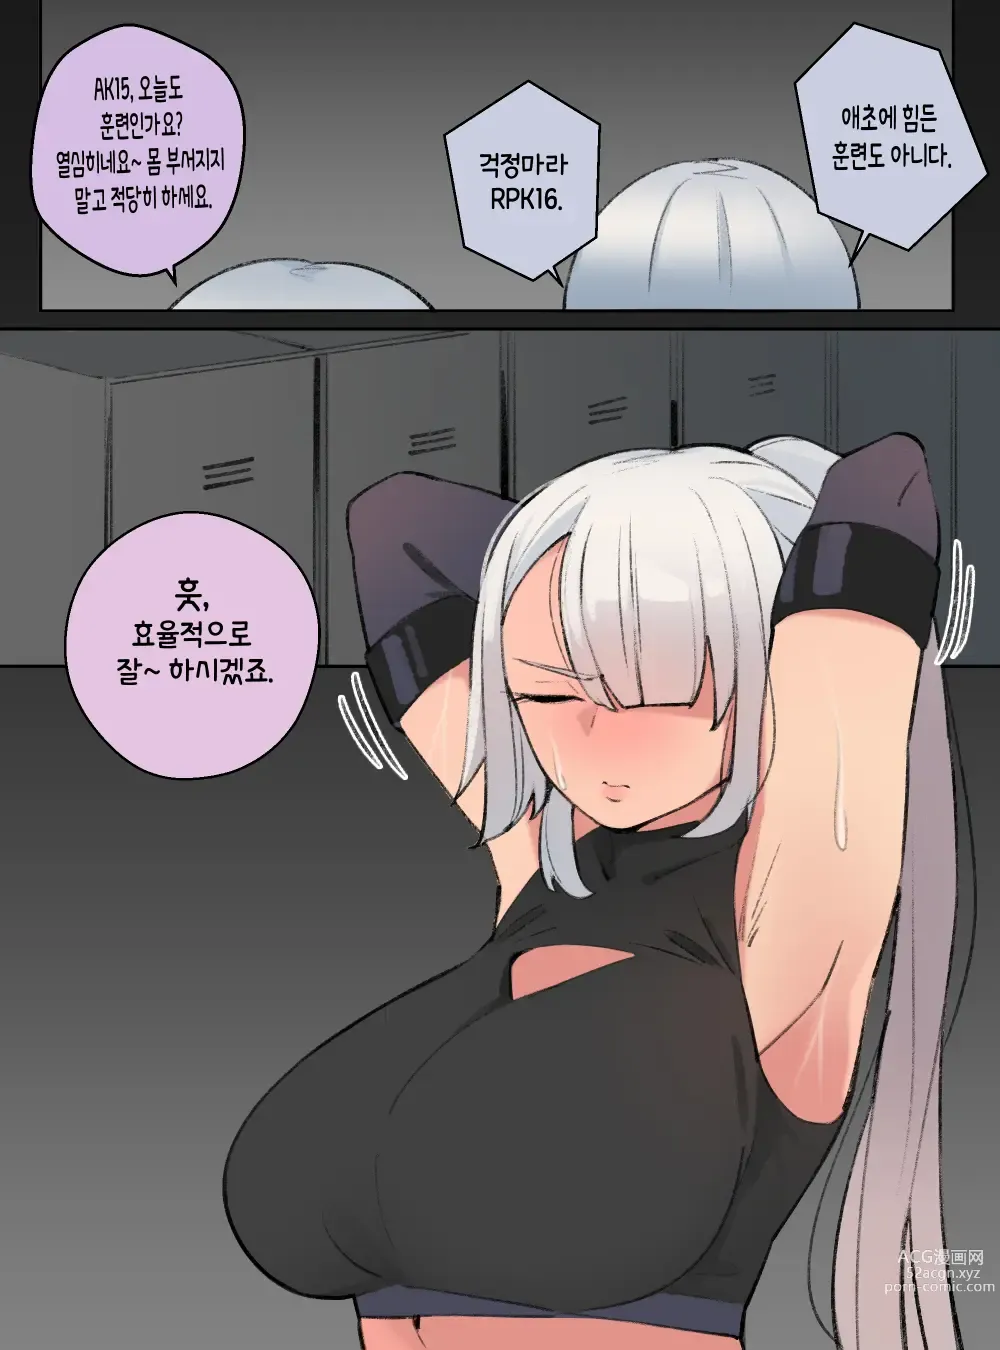 Page 3 of doujinshi Lets exercise with AK15!